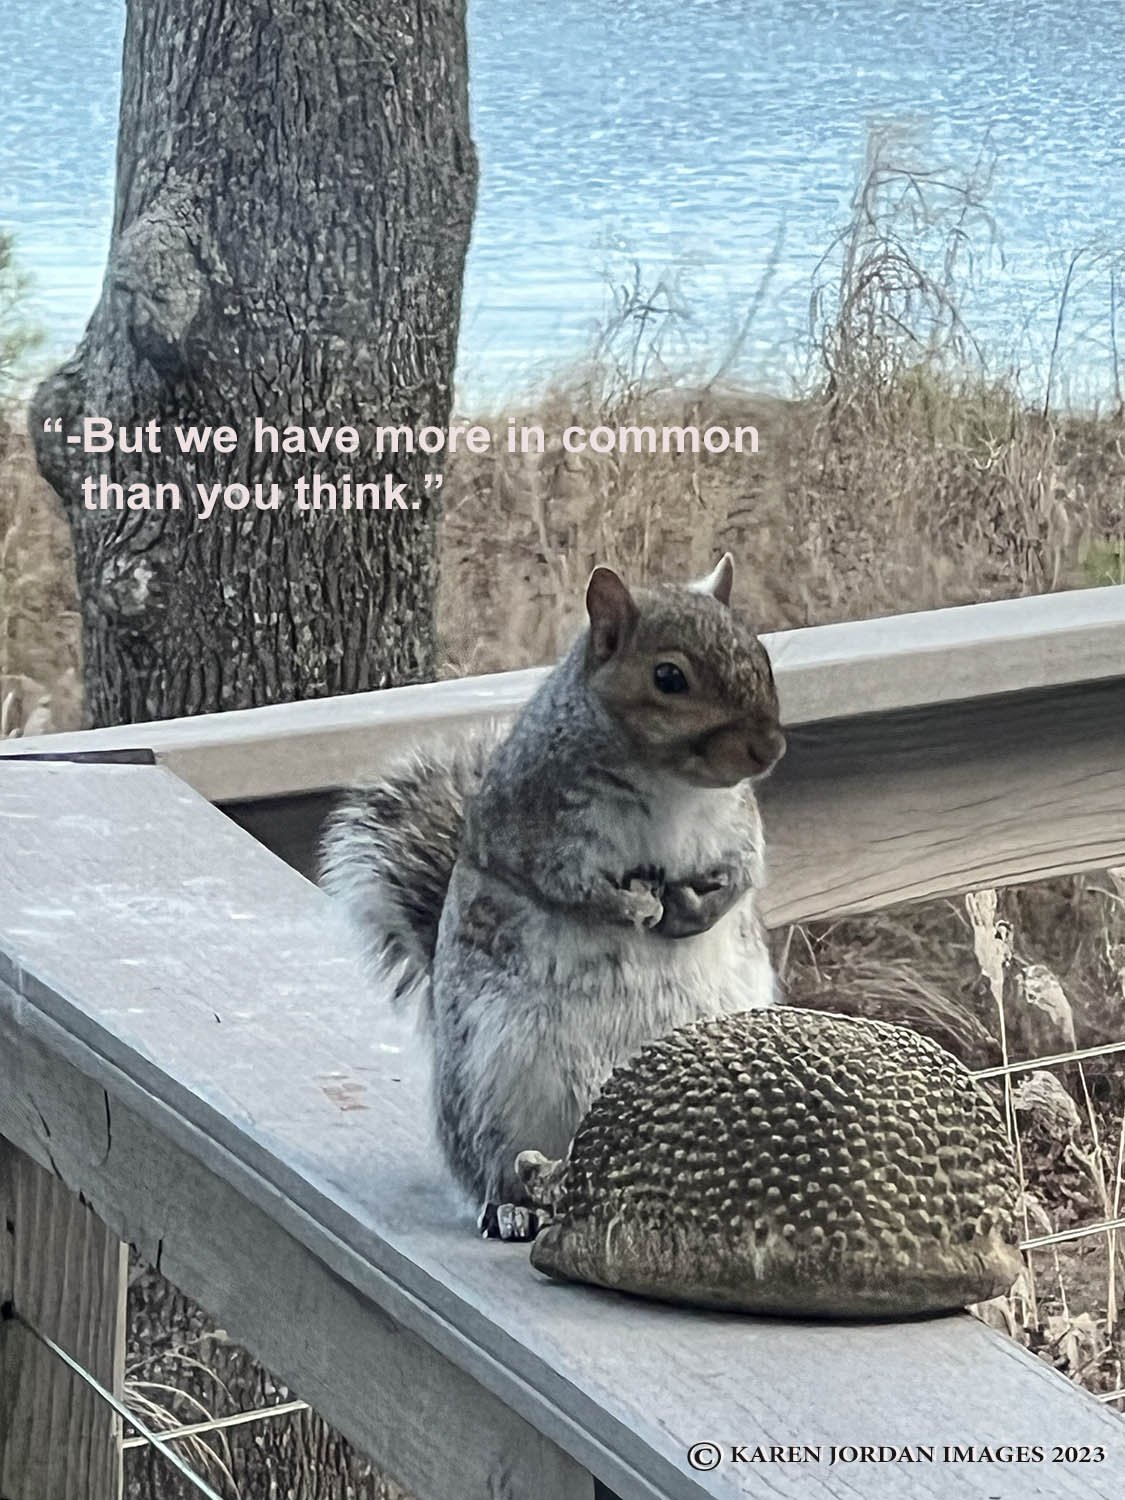 karen_jordan_picture_of_the_week_101_But_we_have_more_in_common_than_you_think_squirrel _hind_legs_behind_hedgehog_caption_on_image_copyright-4web.jpg